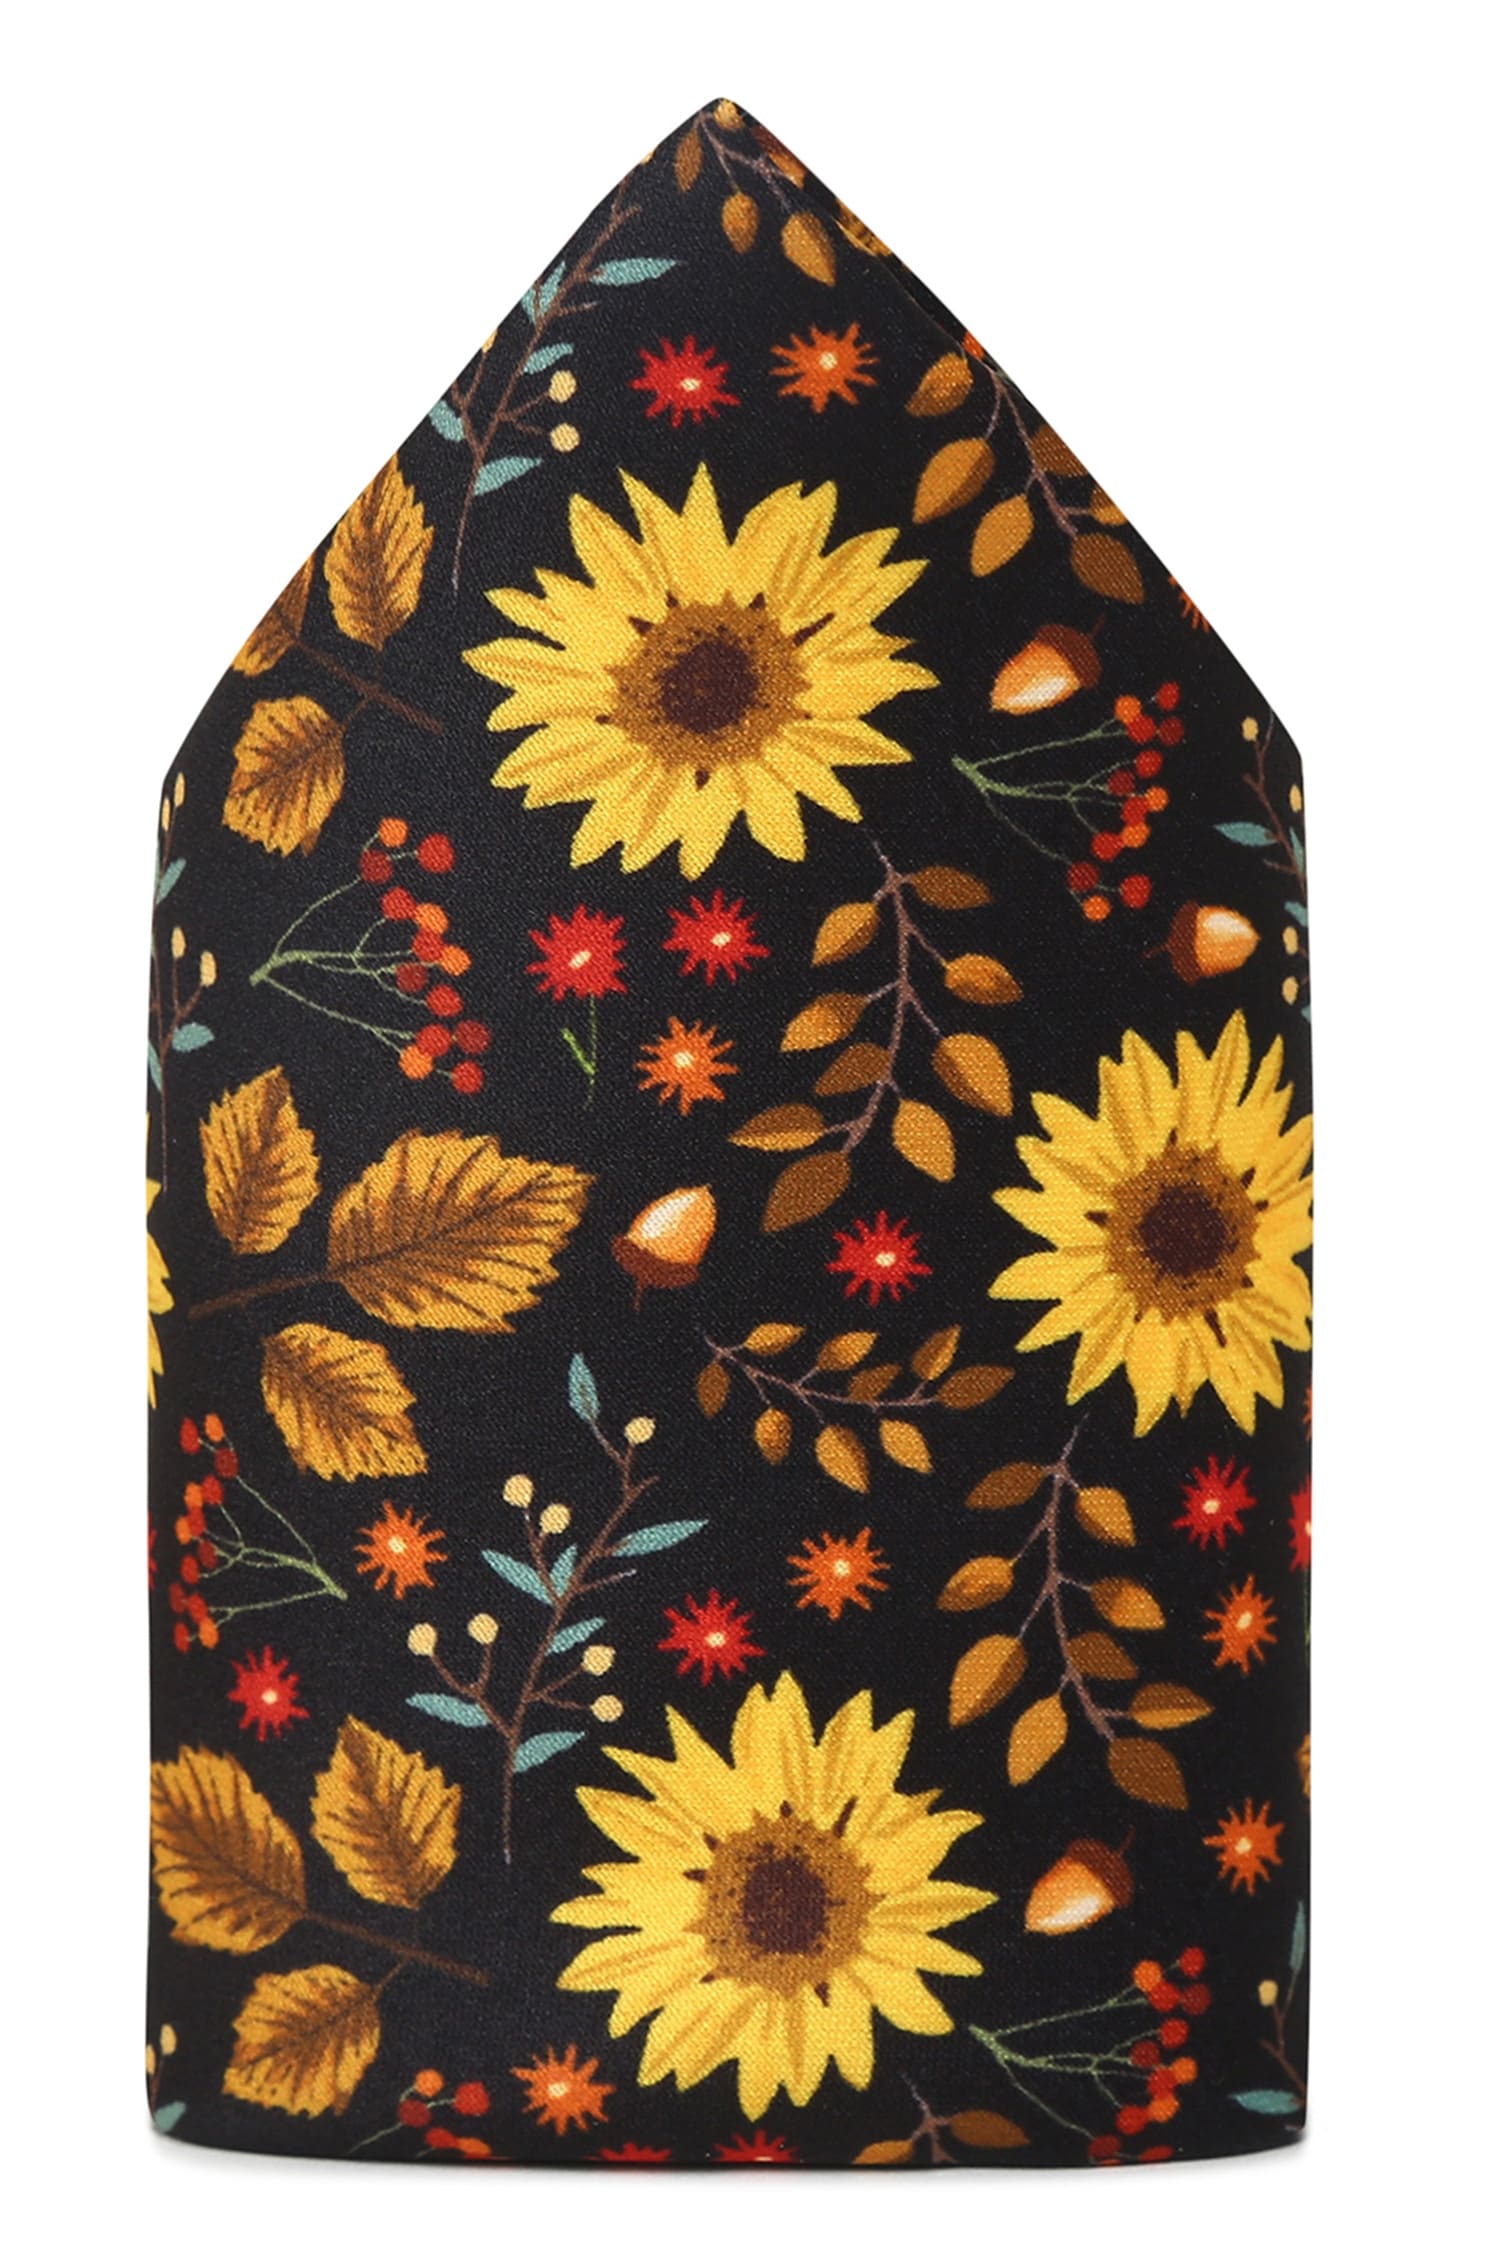 Tossido Multi Color Printed Sunflower Pattern Pocket Square